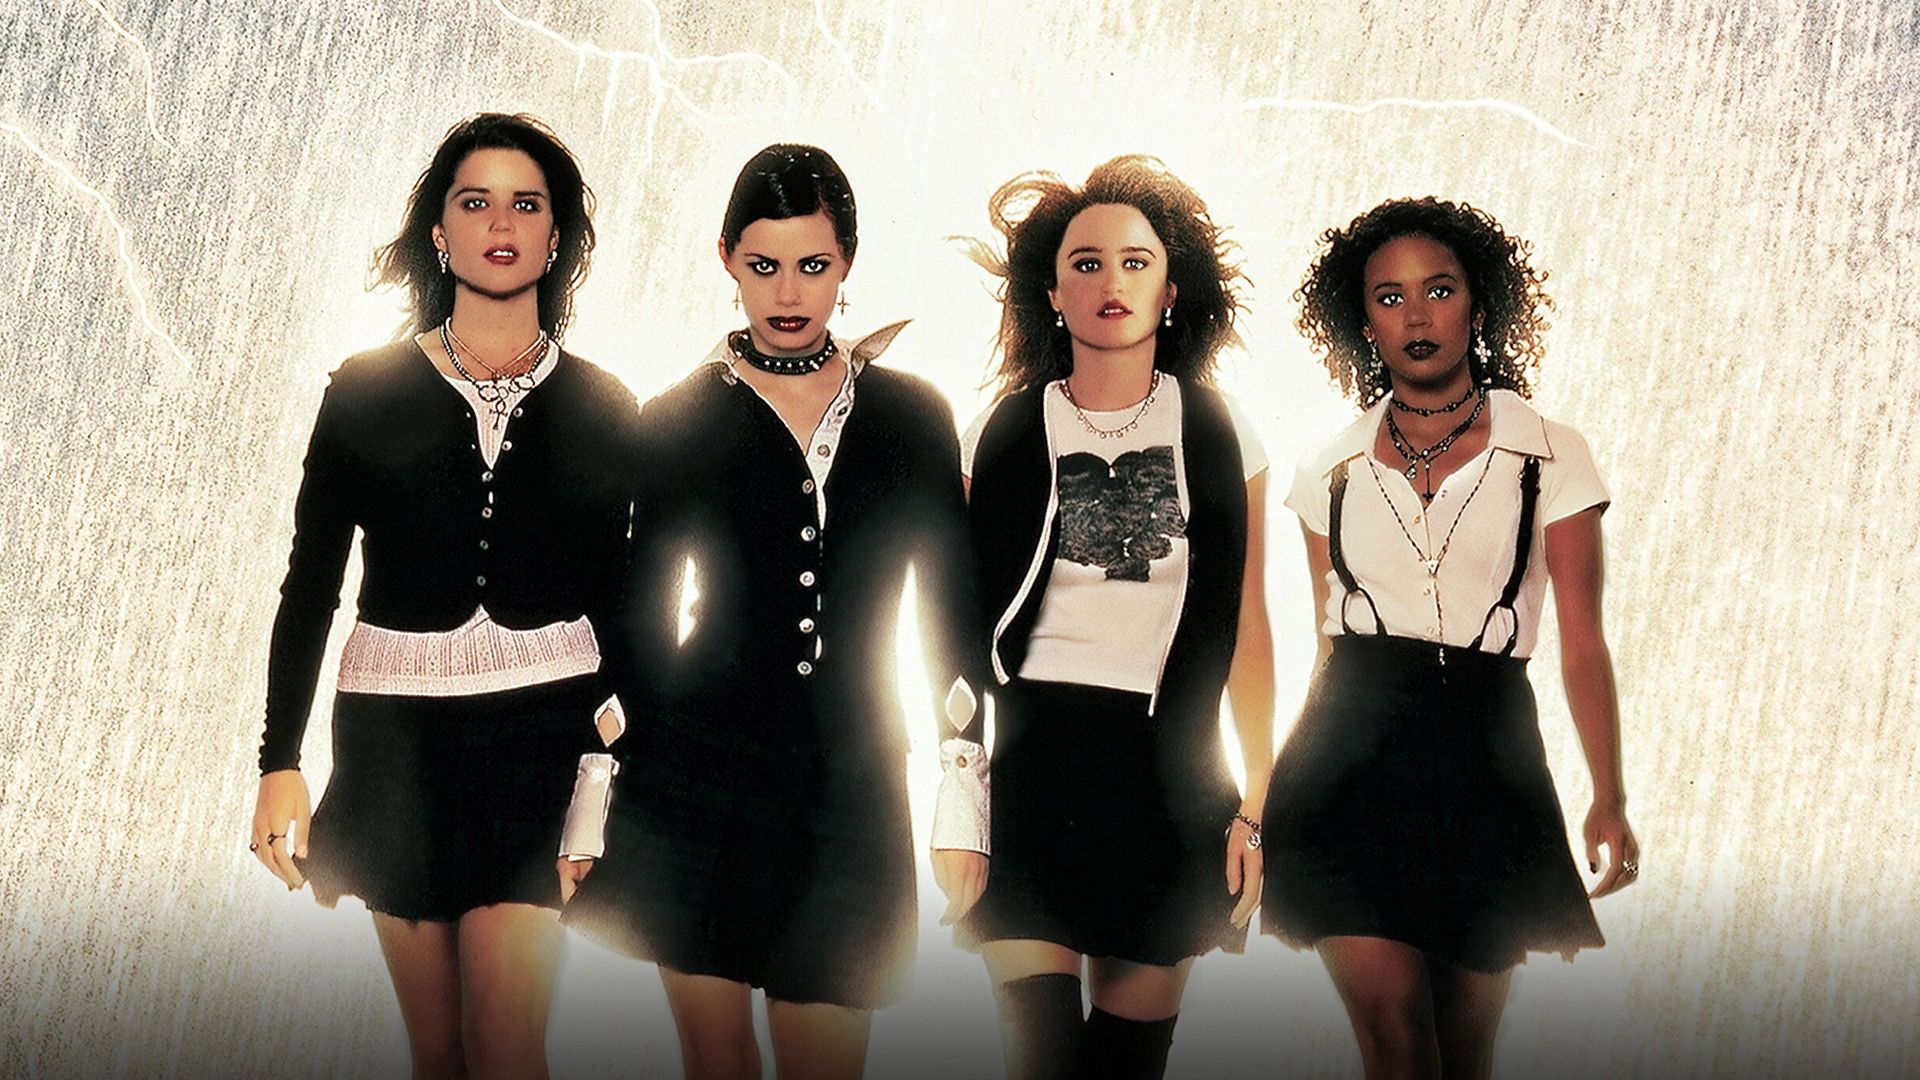 The Craft background